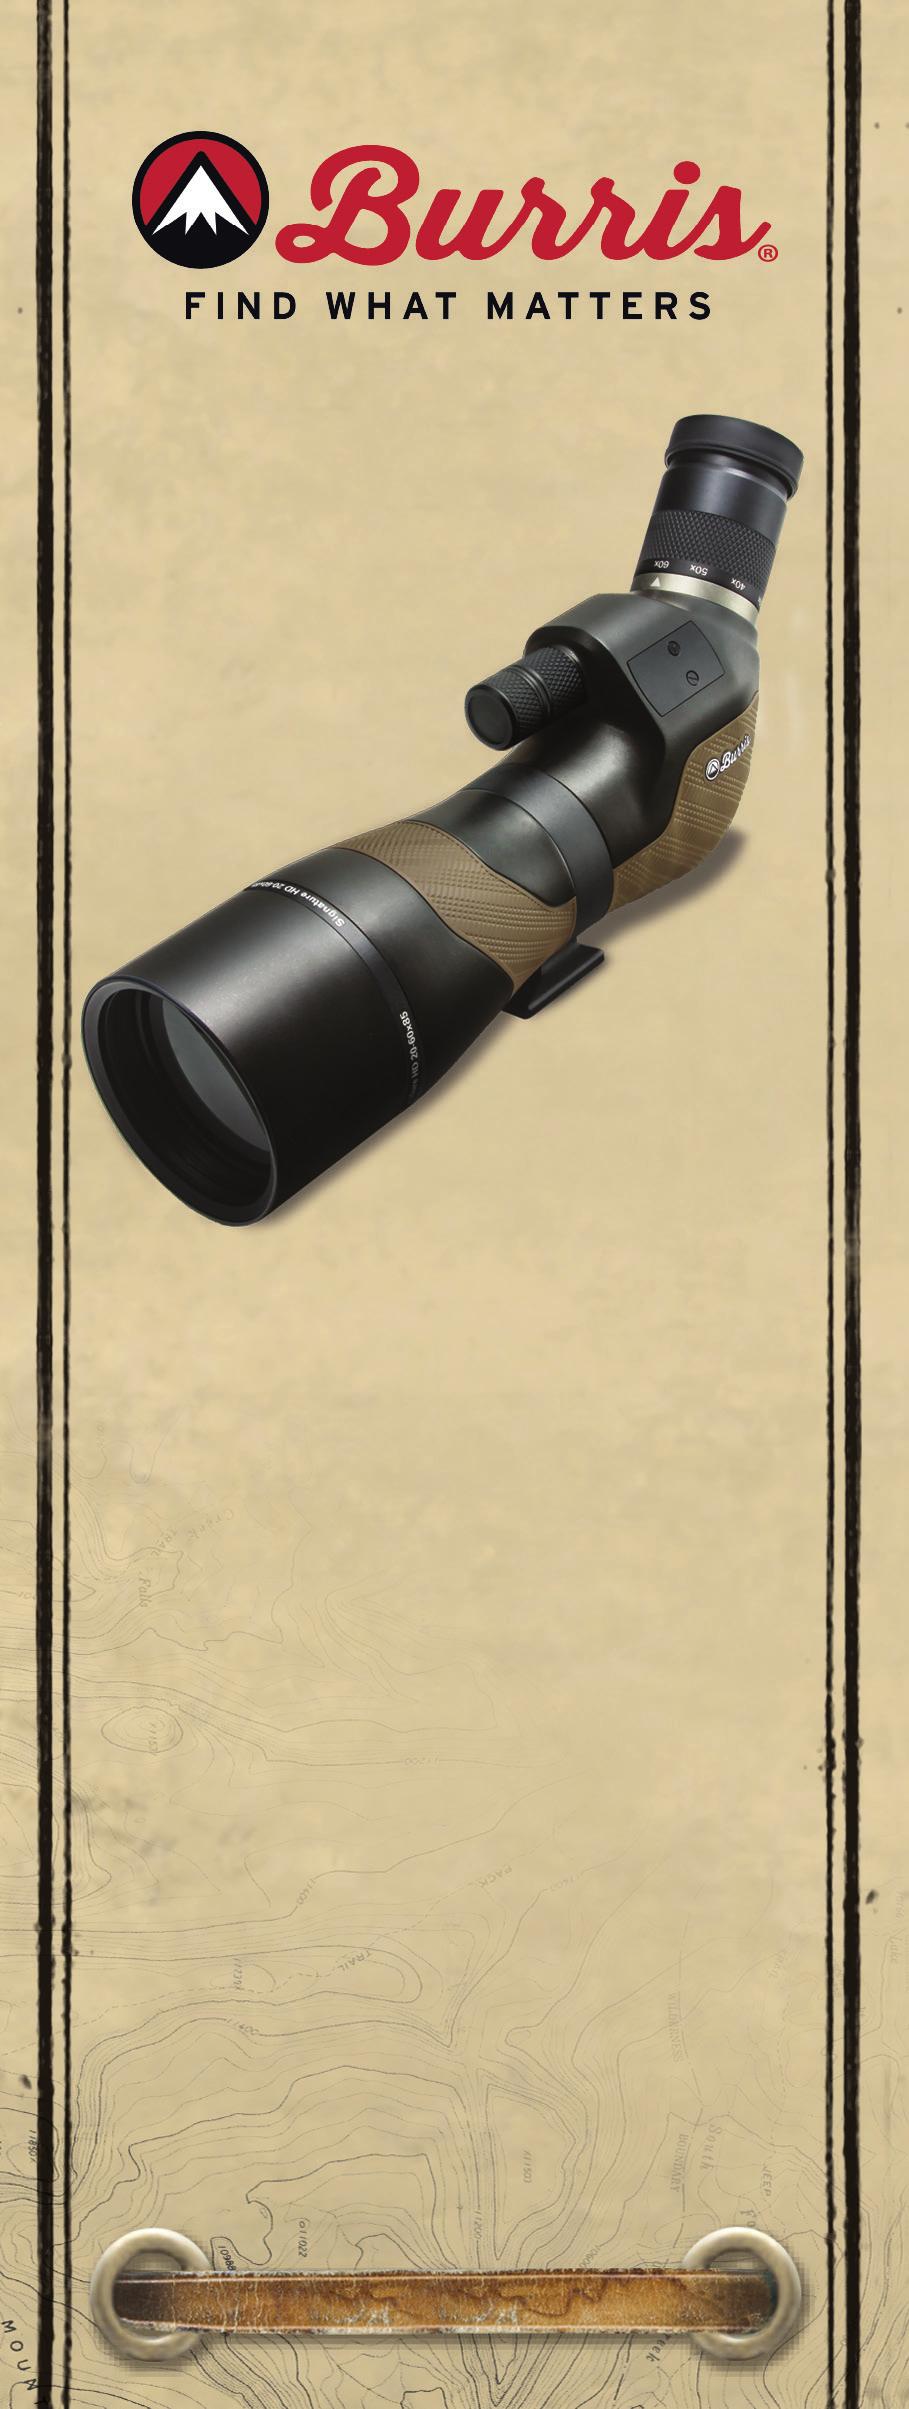 SIGNATURE HD SPOTTING SCOPE User Guide This user guide includes information for the Signature HD Spotting